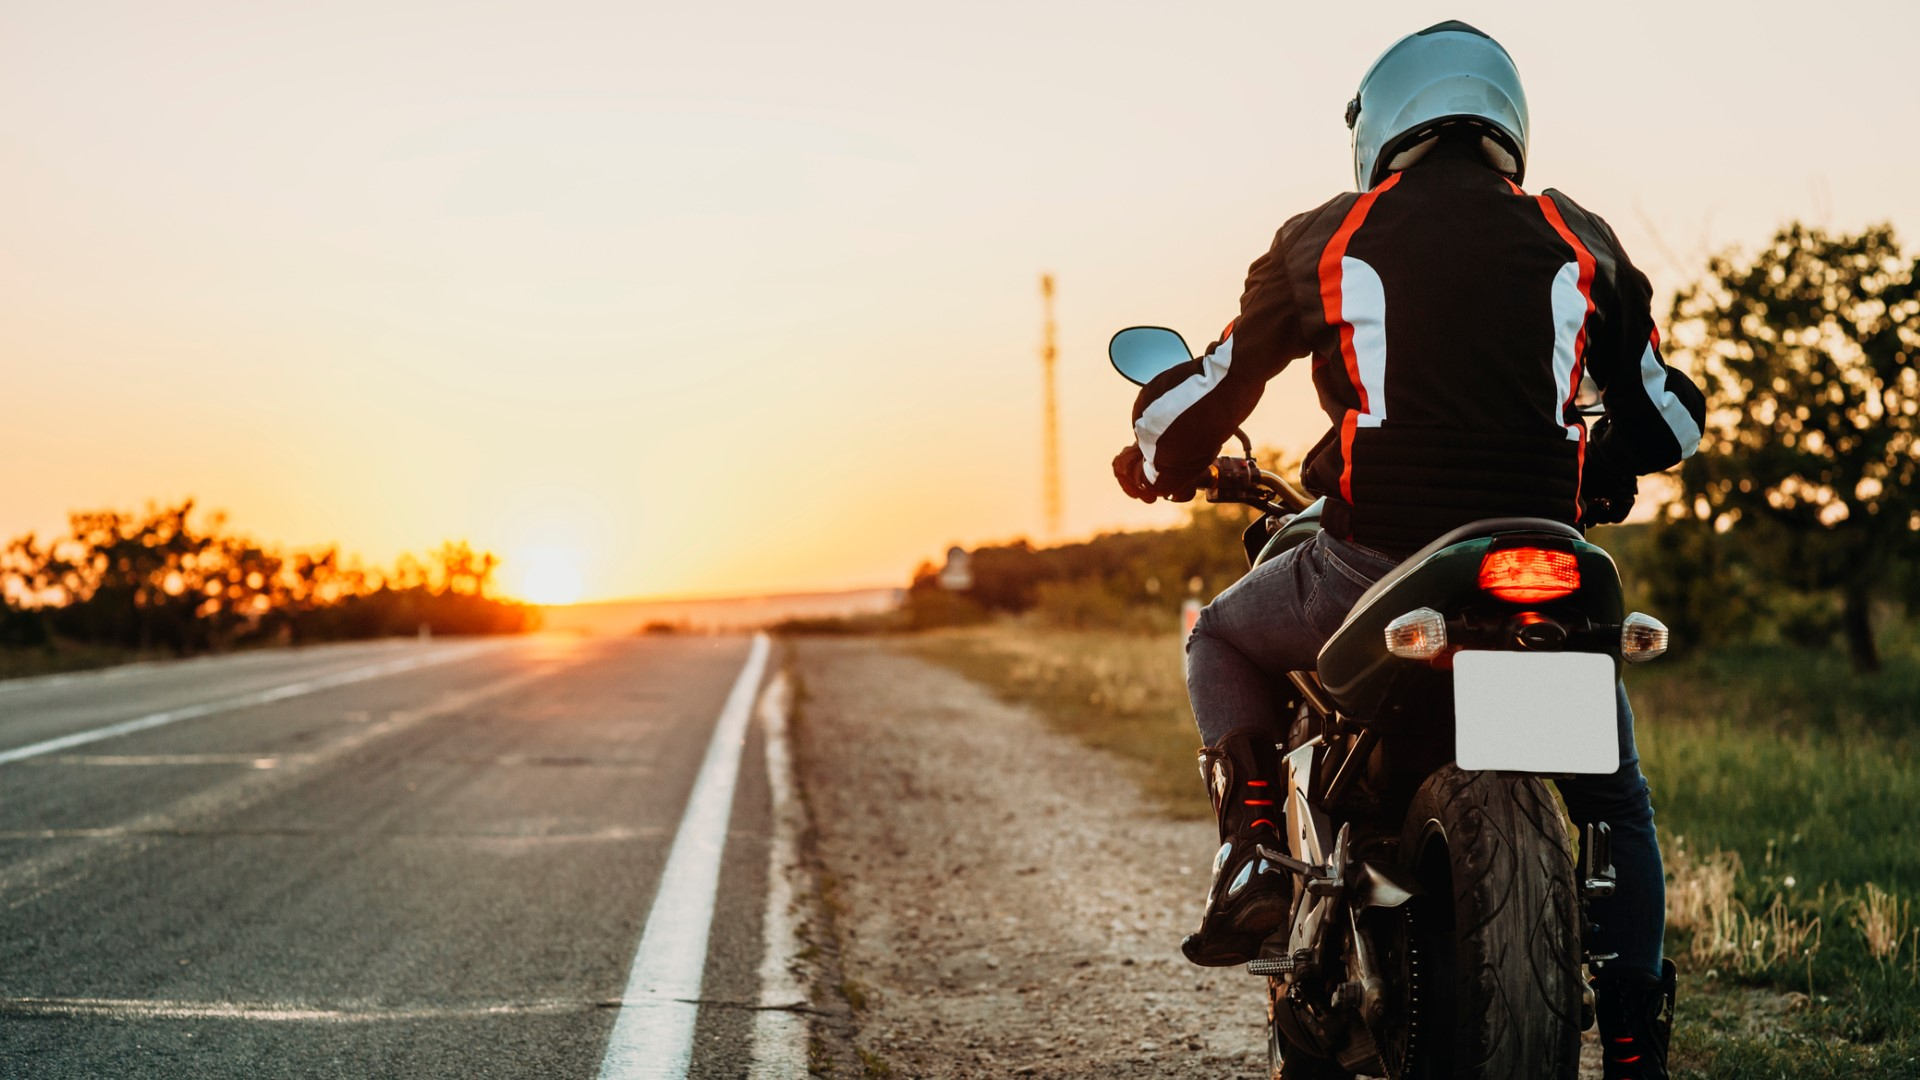 Washington State Will Now Require Motorcycle Insurance intended for measurements 1920 X 1080